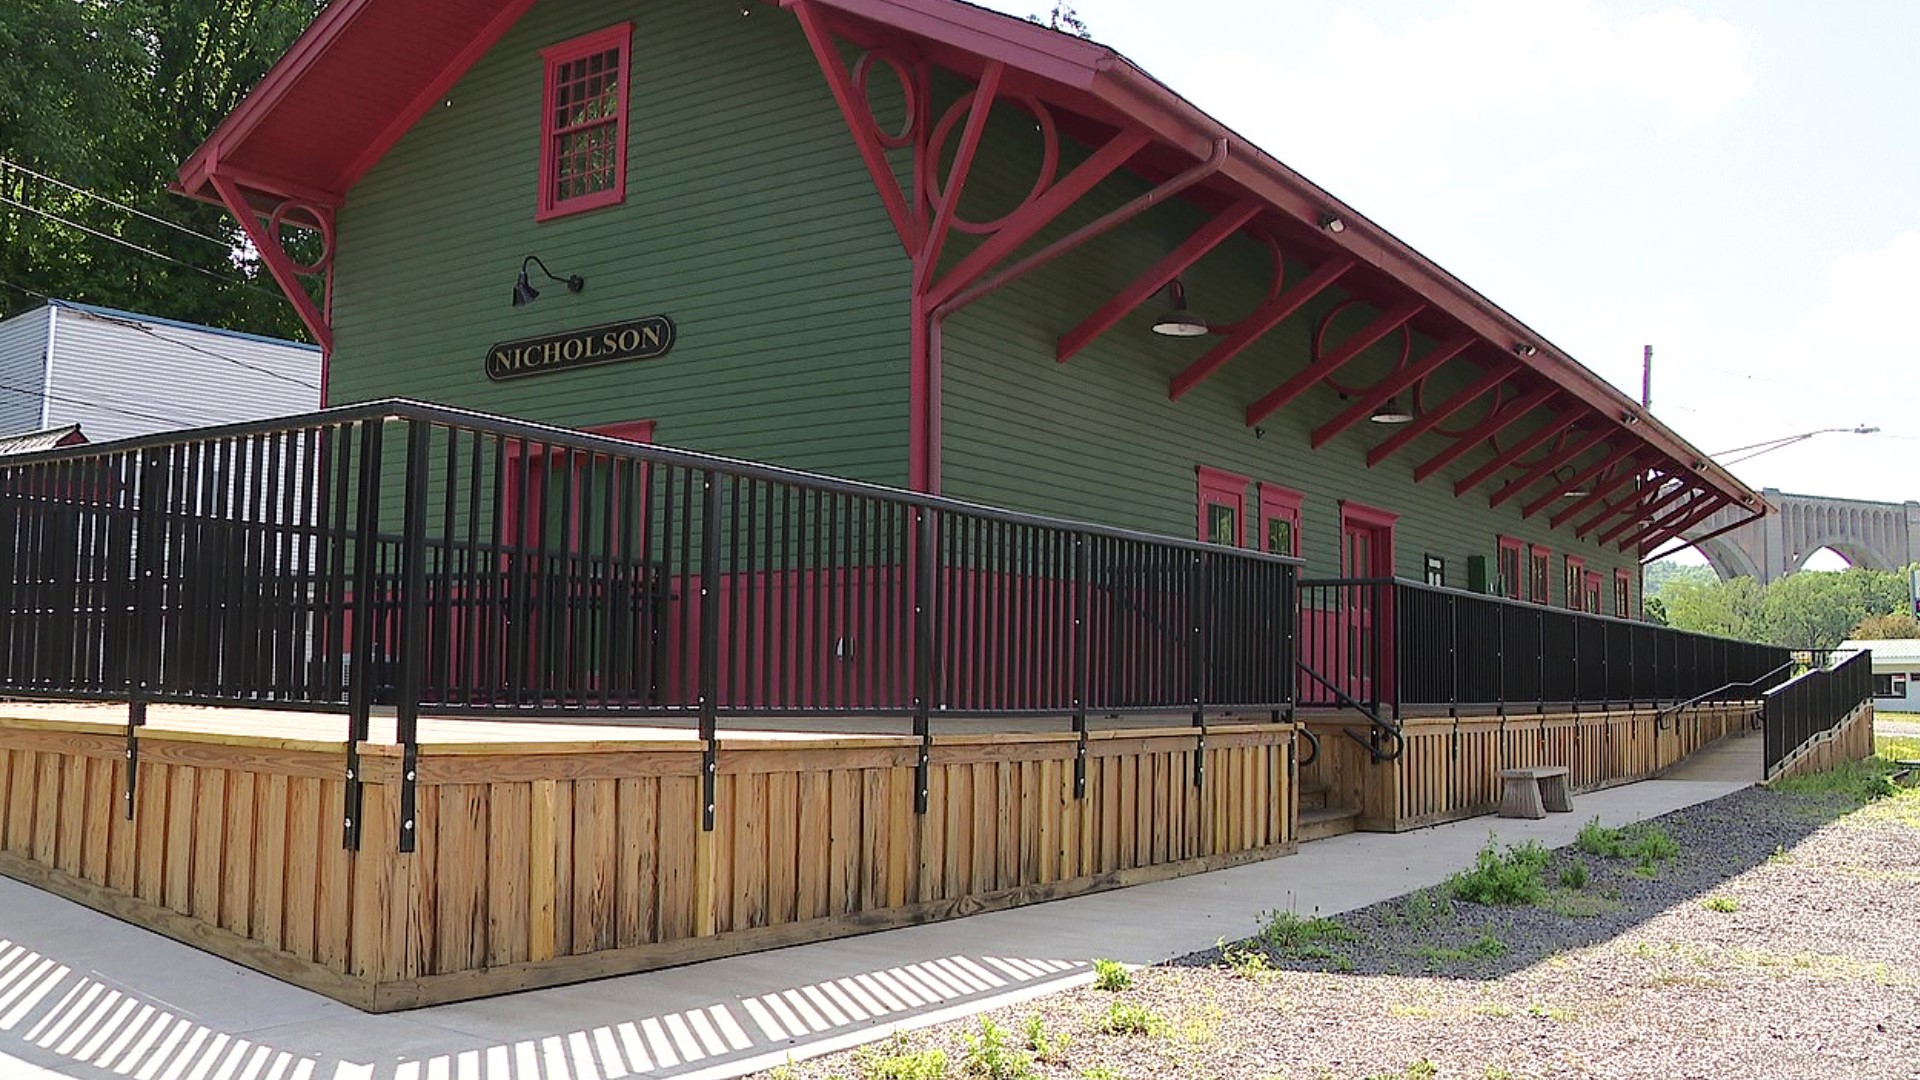 For a century, it served the railroading industry, and now an old train station has been refurbished to serve tourists.